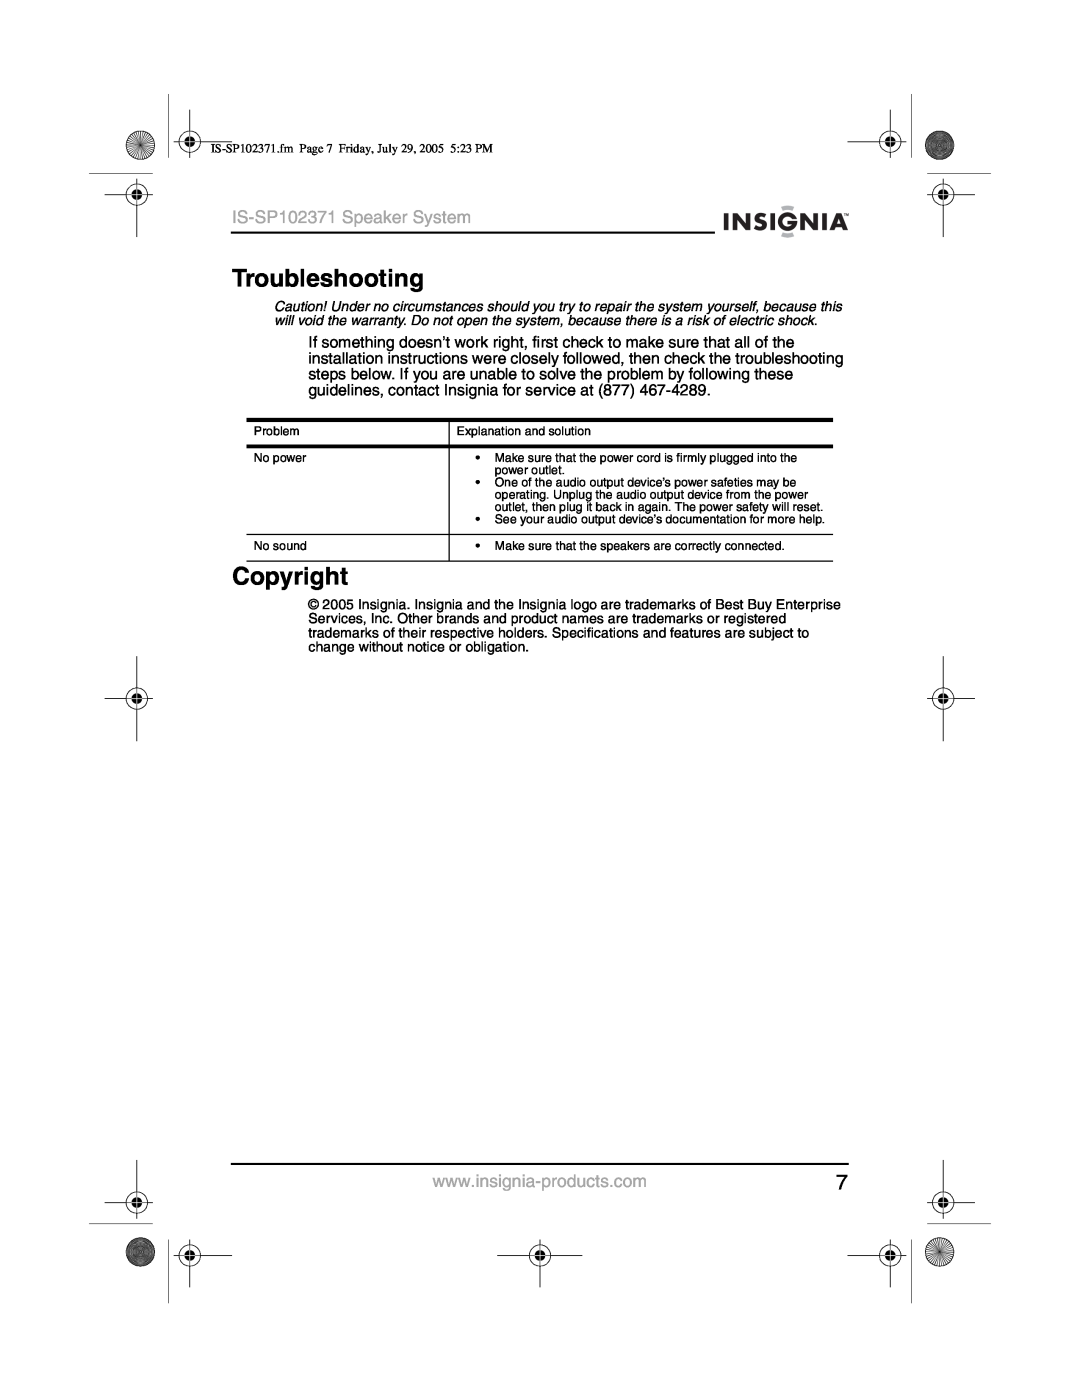 Insignia manual Troubleshooting, Copyright, IS-SP102371Speaker System 